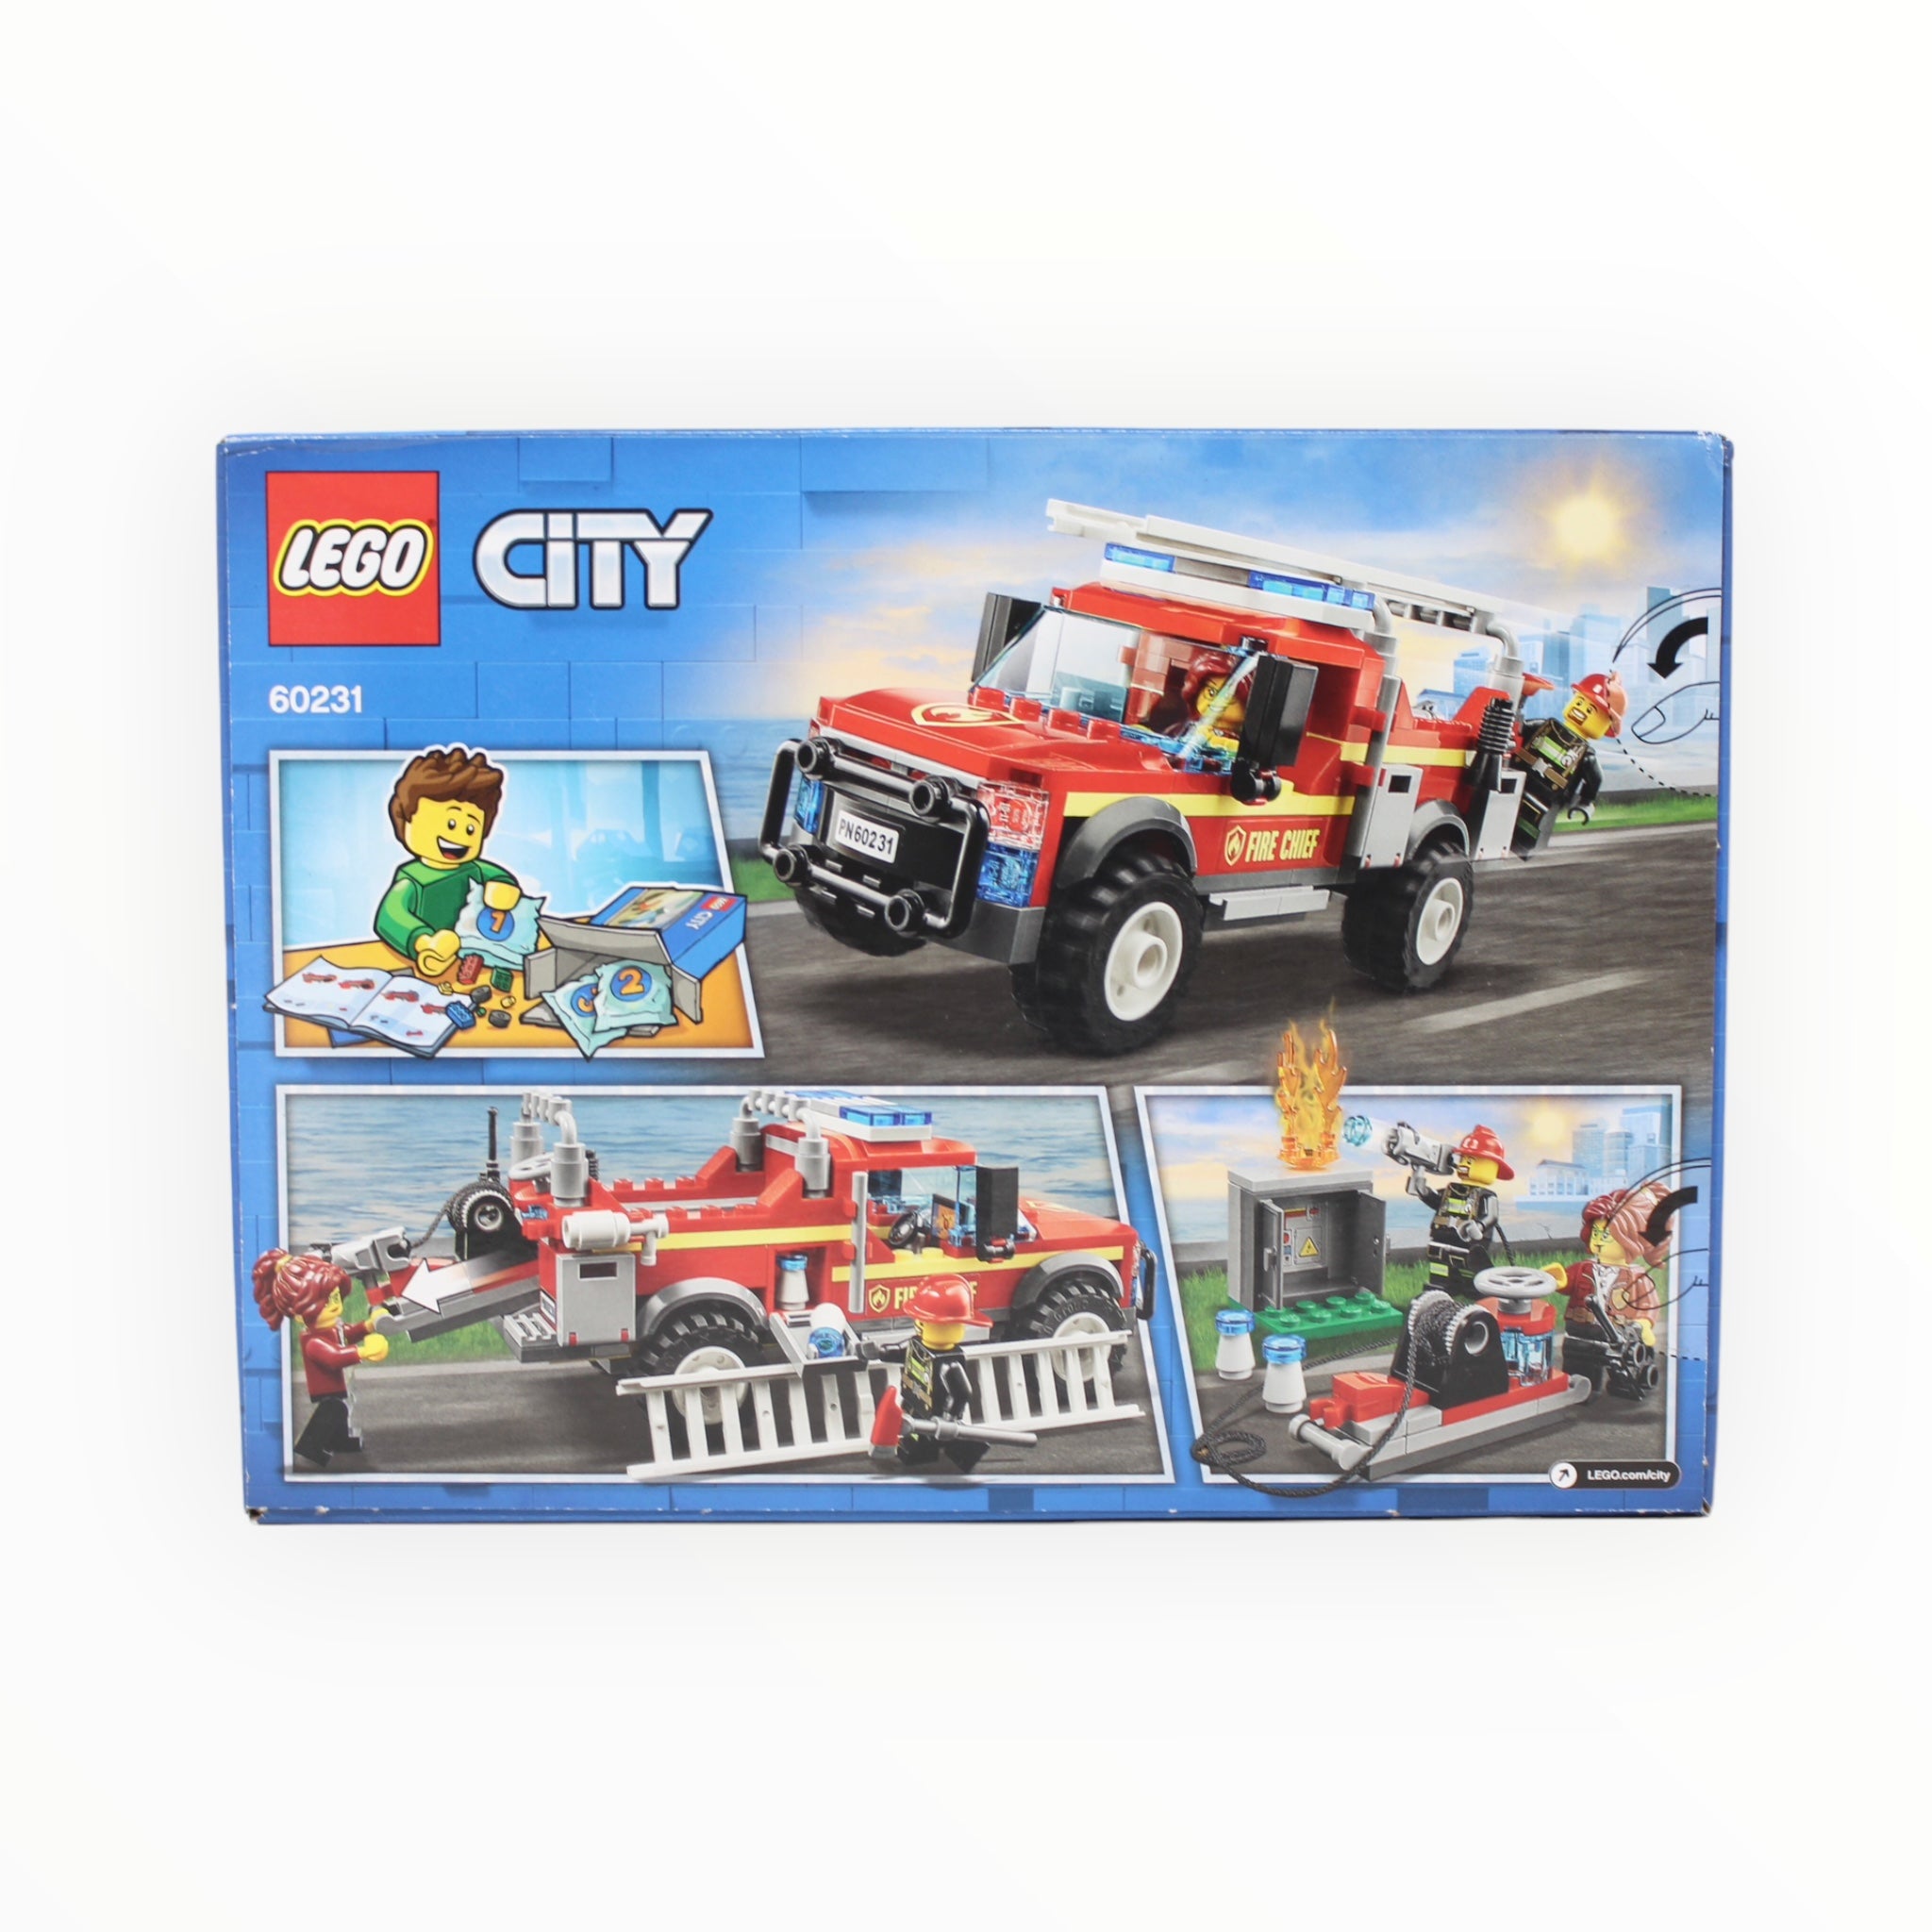 Retired Set 60231 City Fire Chief Response Truck